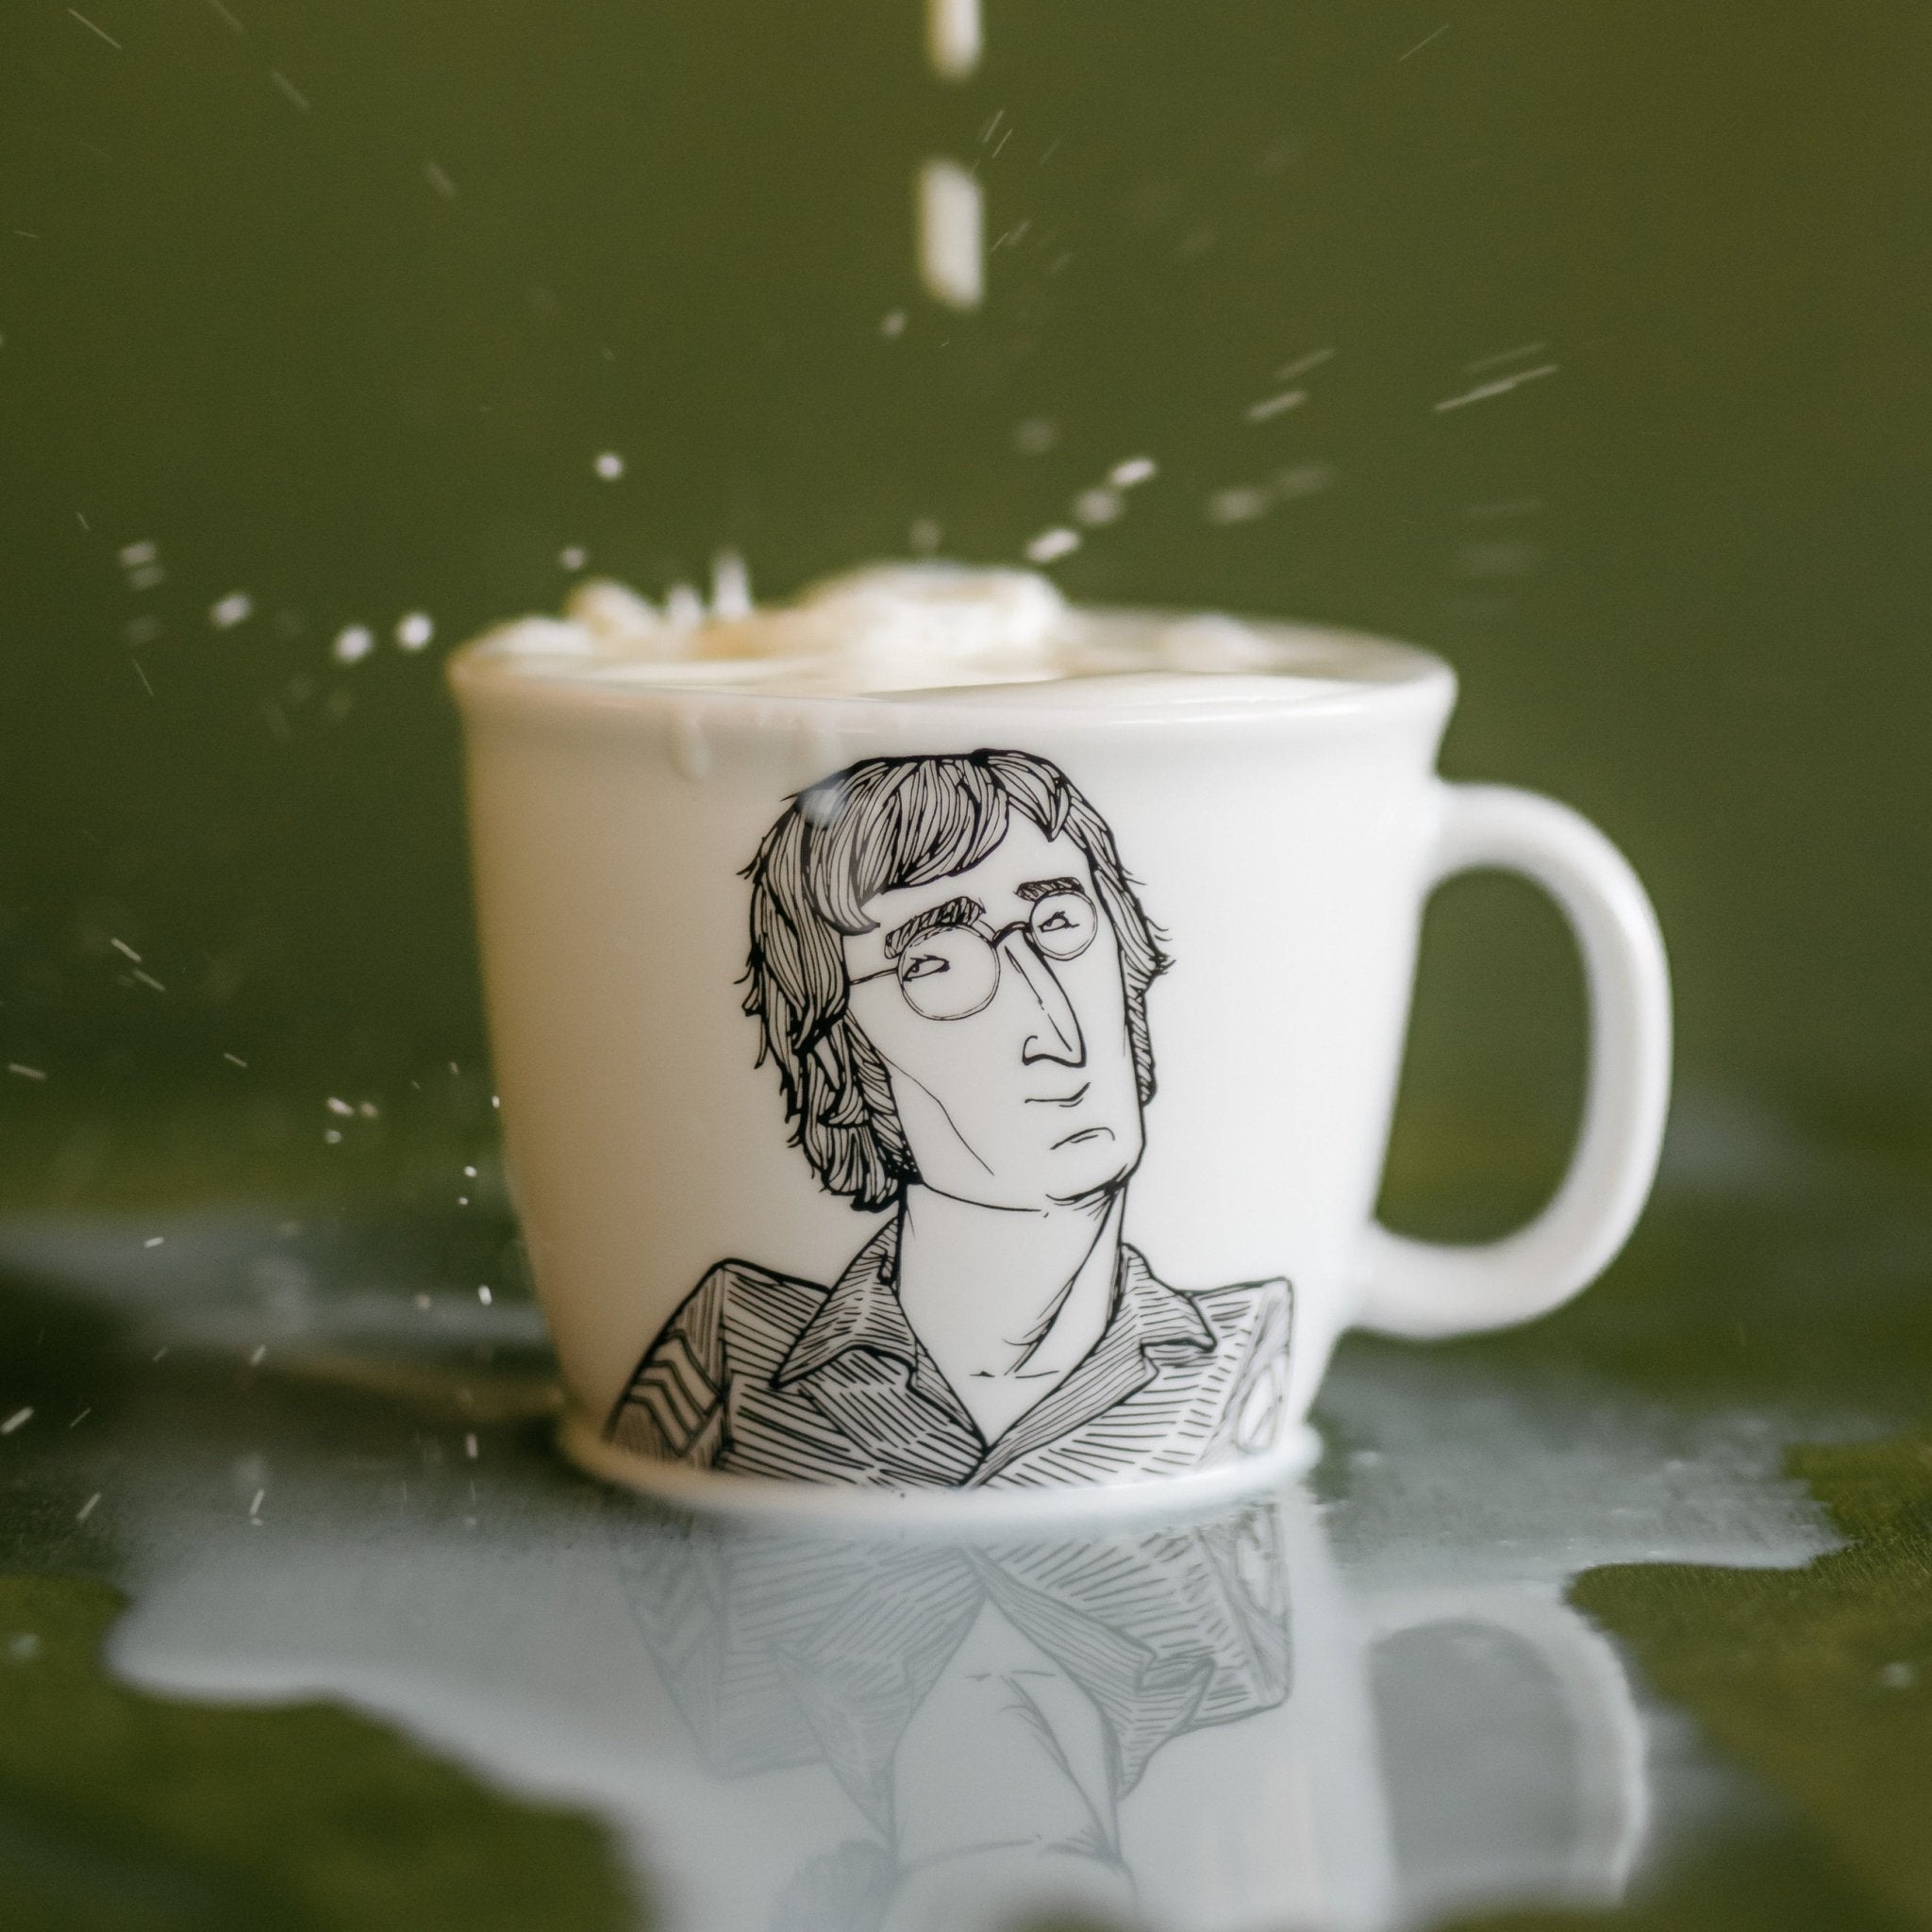 Porcelain cup inspired by John Lennon with a splash of milk